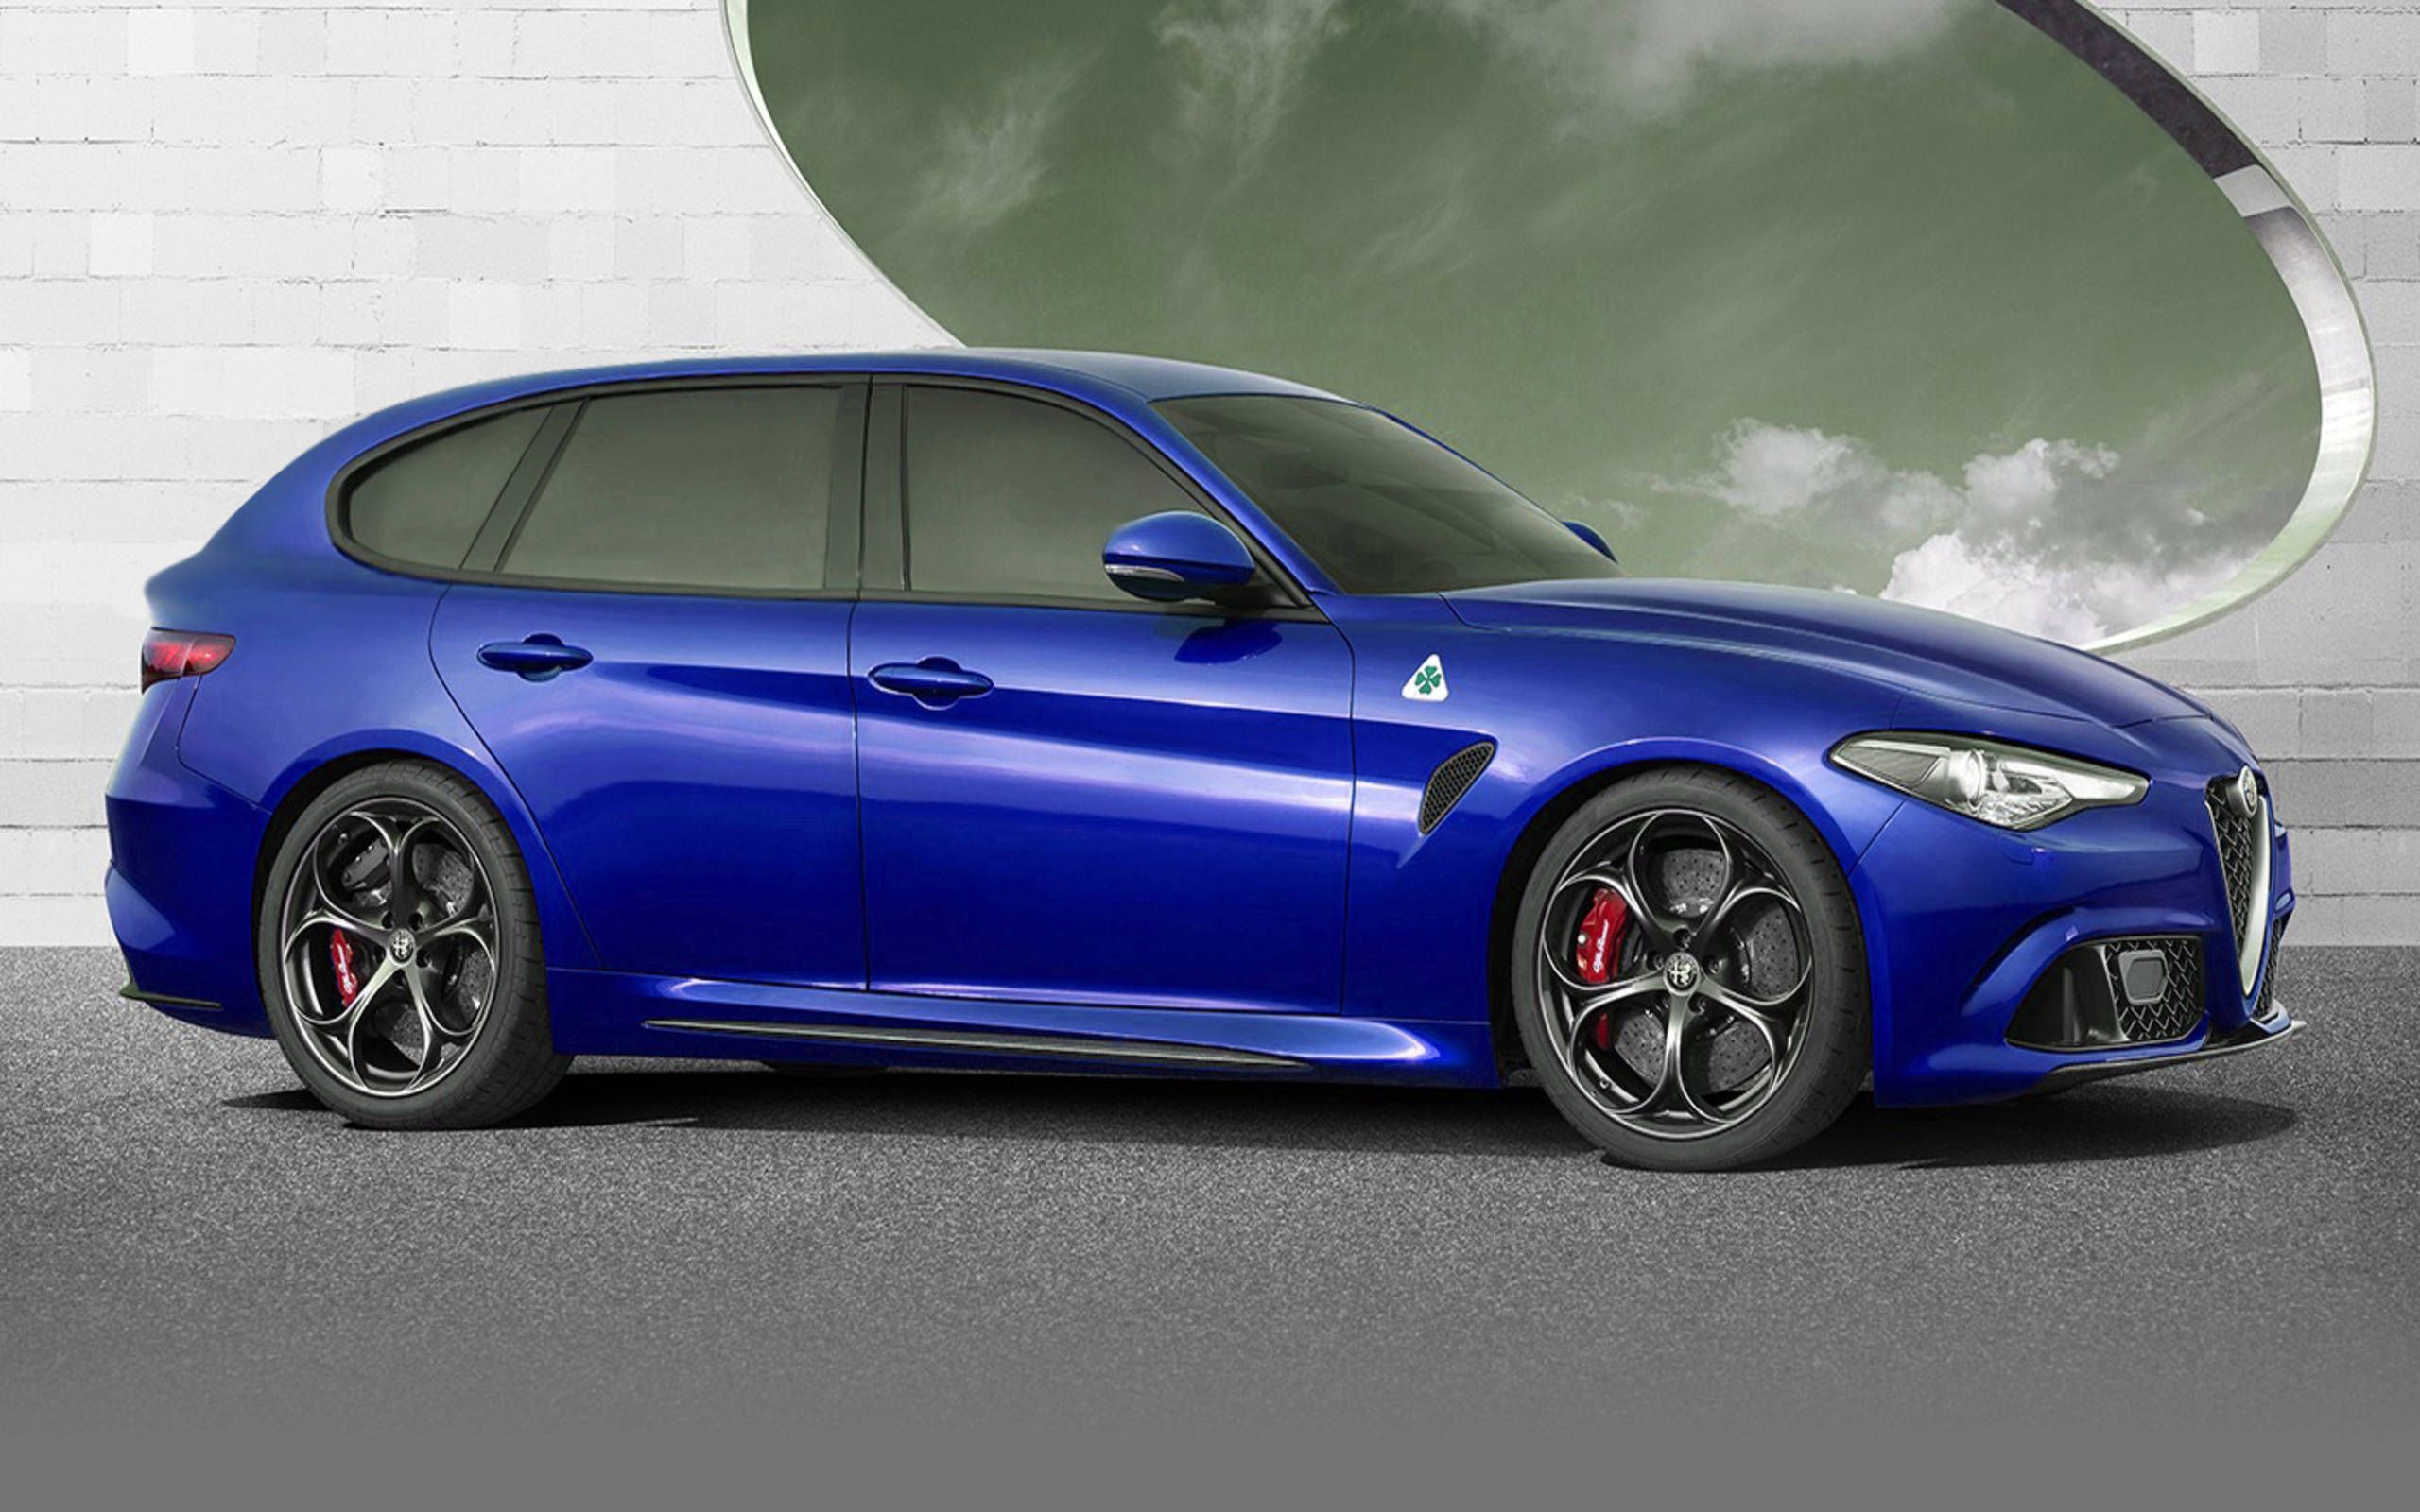 Alfa Romeo Giulia Wagon Is In The Works But Will We Get It Here